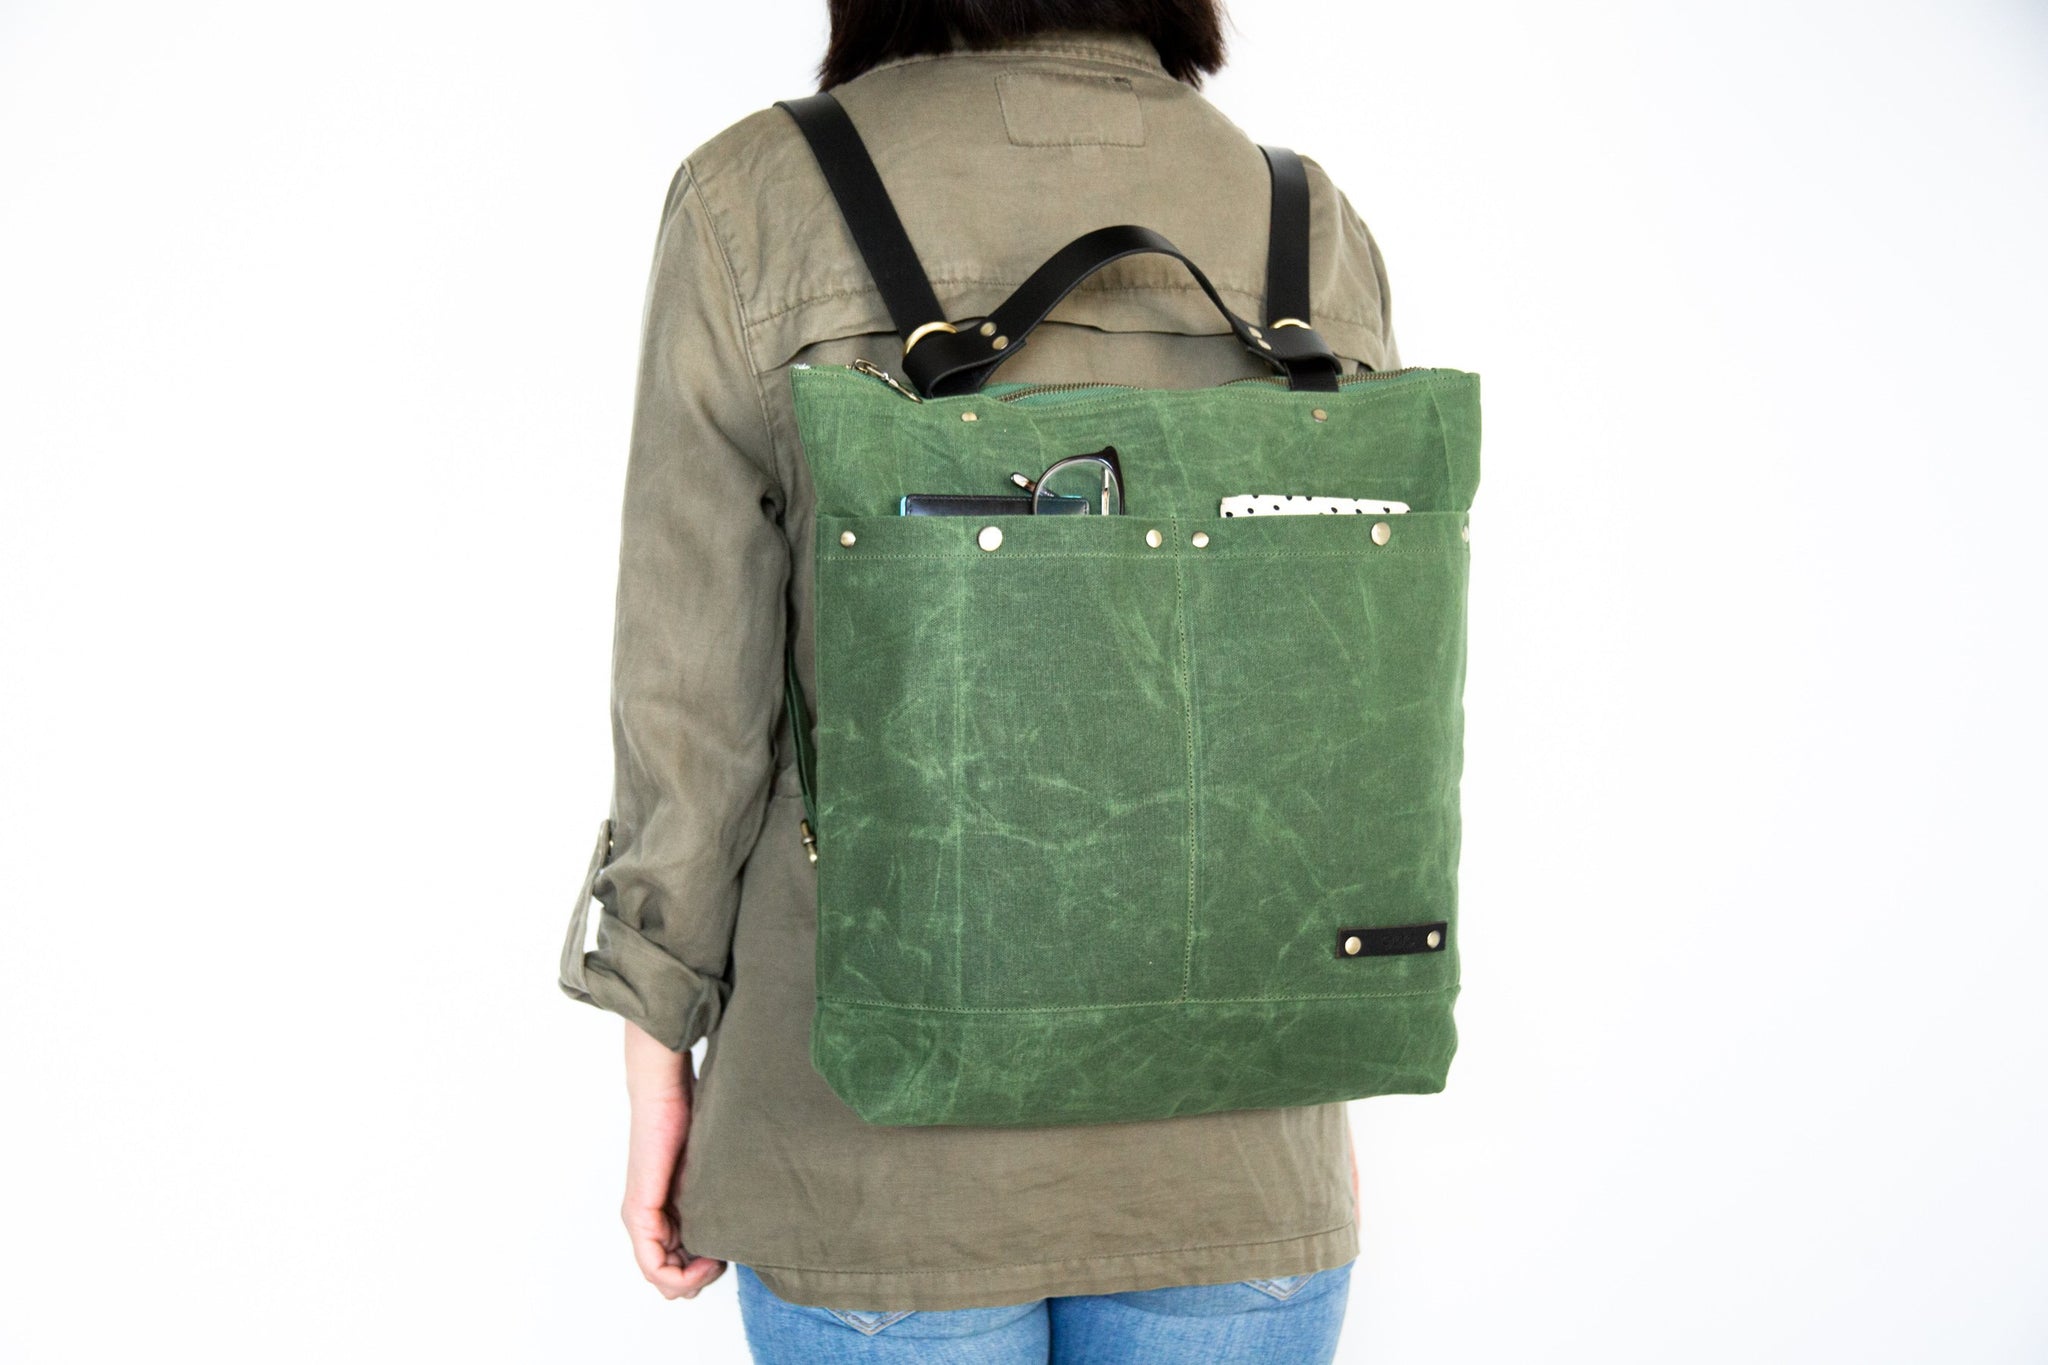 CITYCARRY / Laptop Travel Backpack / GN GY Canvas